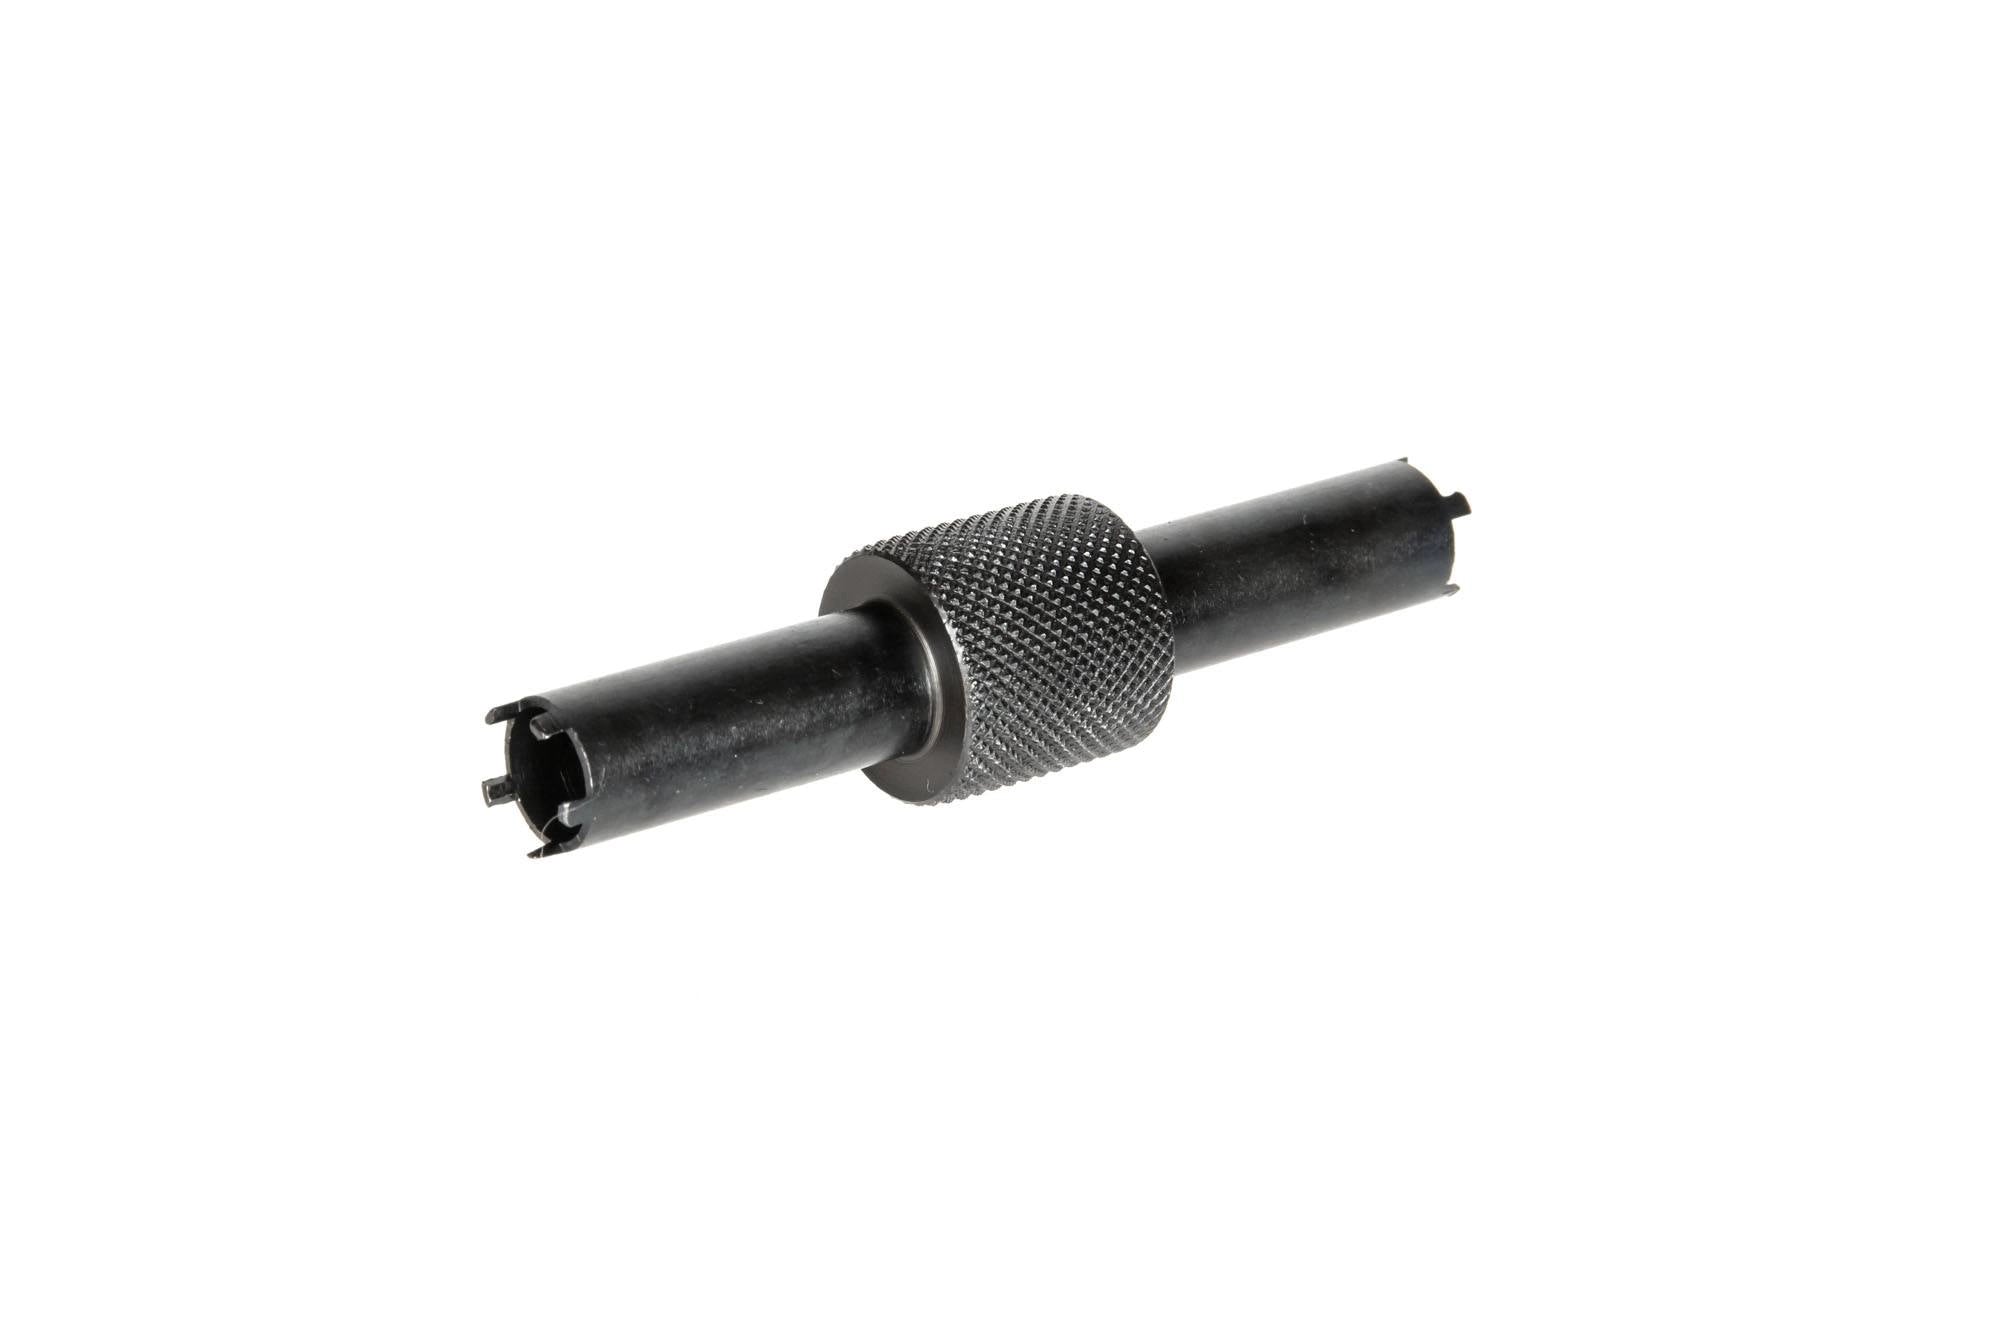 Front Sight 4/5 Adjustment Tool for AR15 Assault Rifle Replicas